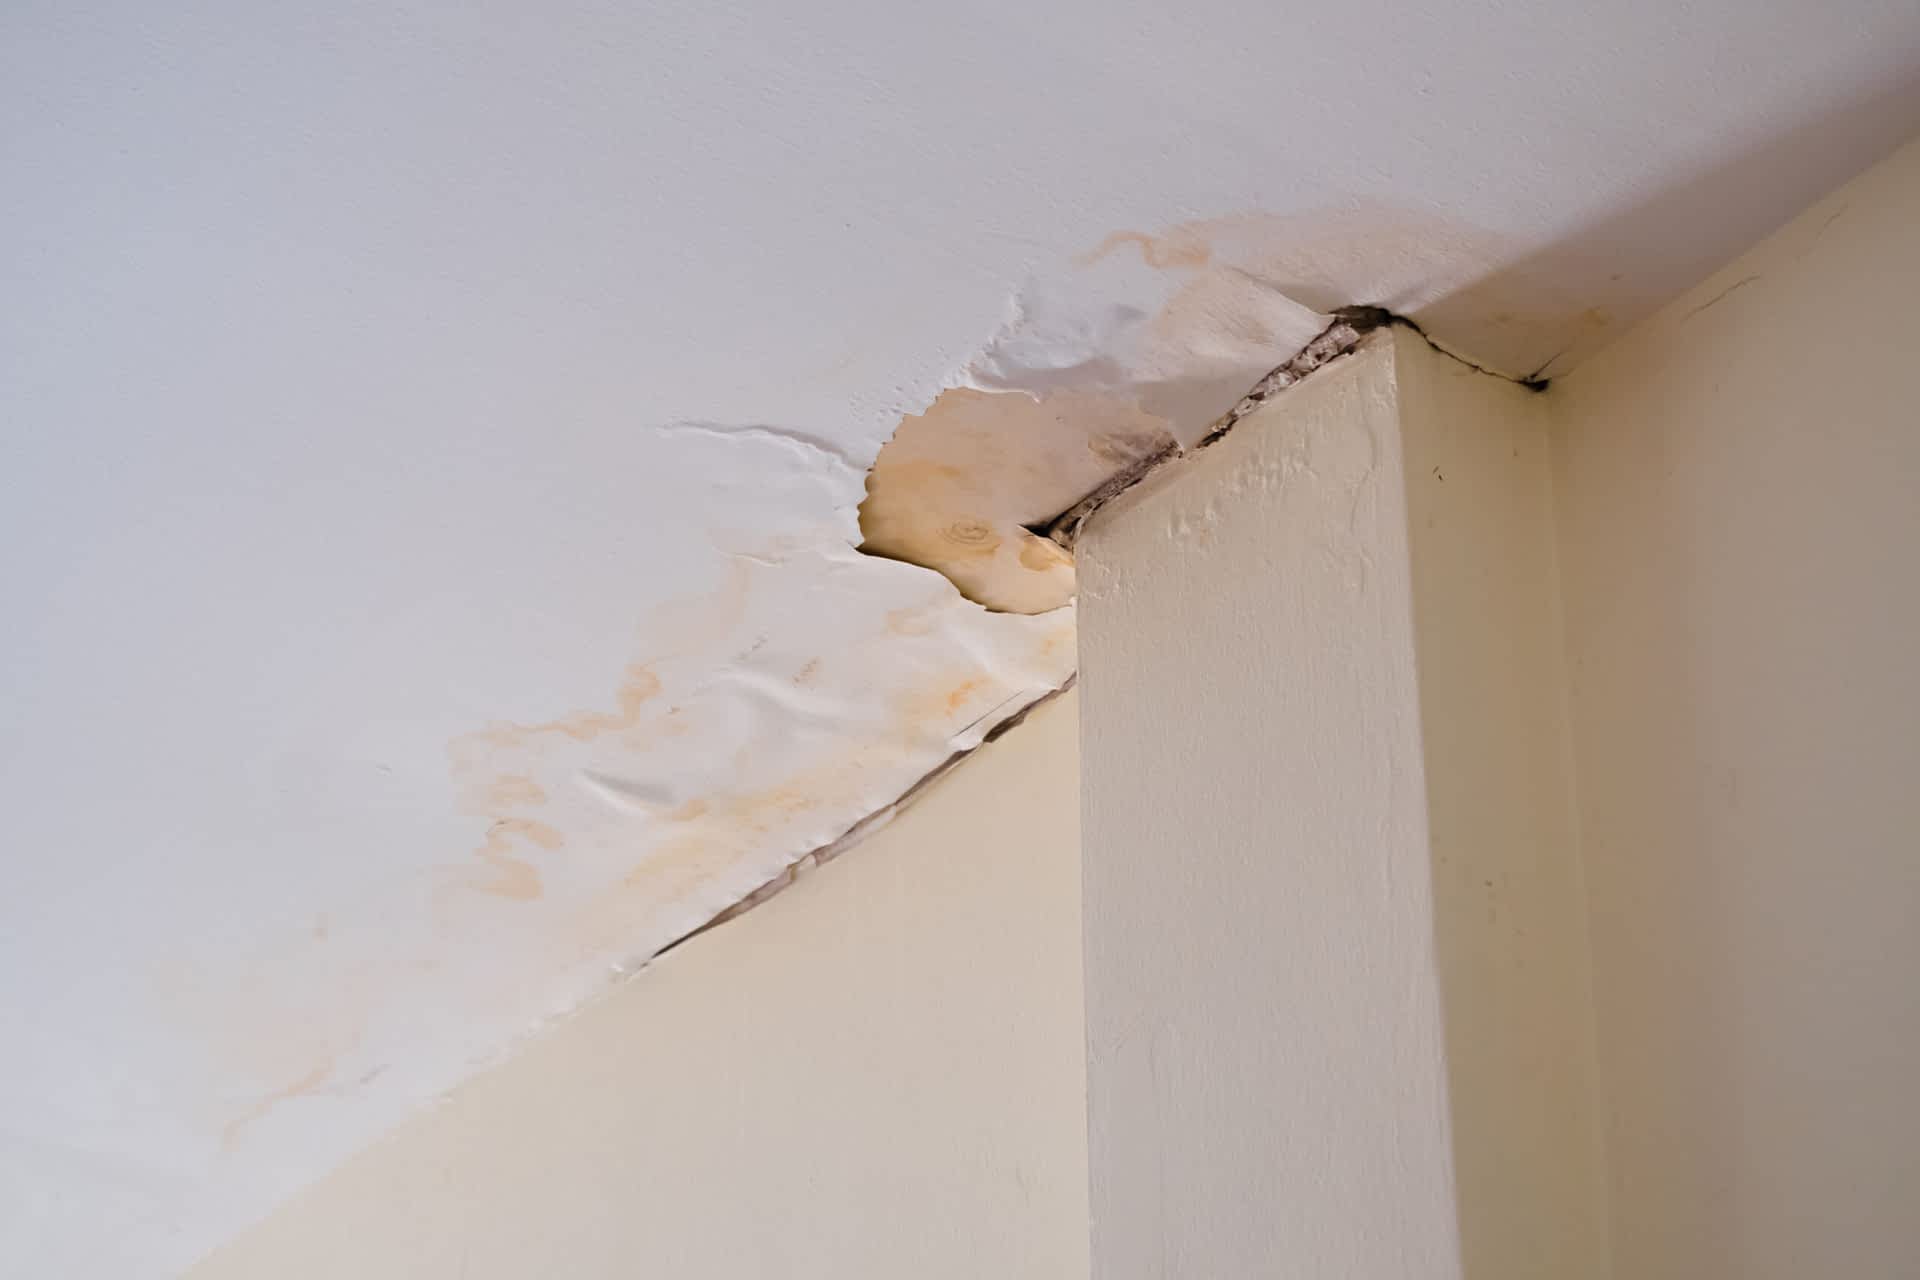 Water Damage Restoration Contractor New York -  Water Damage to Ceiling